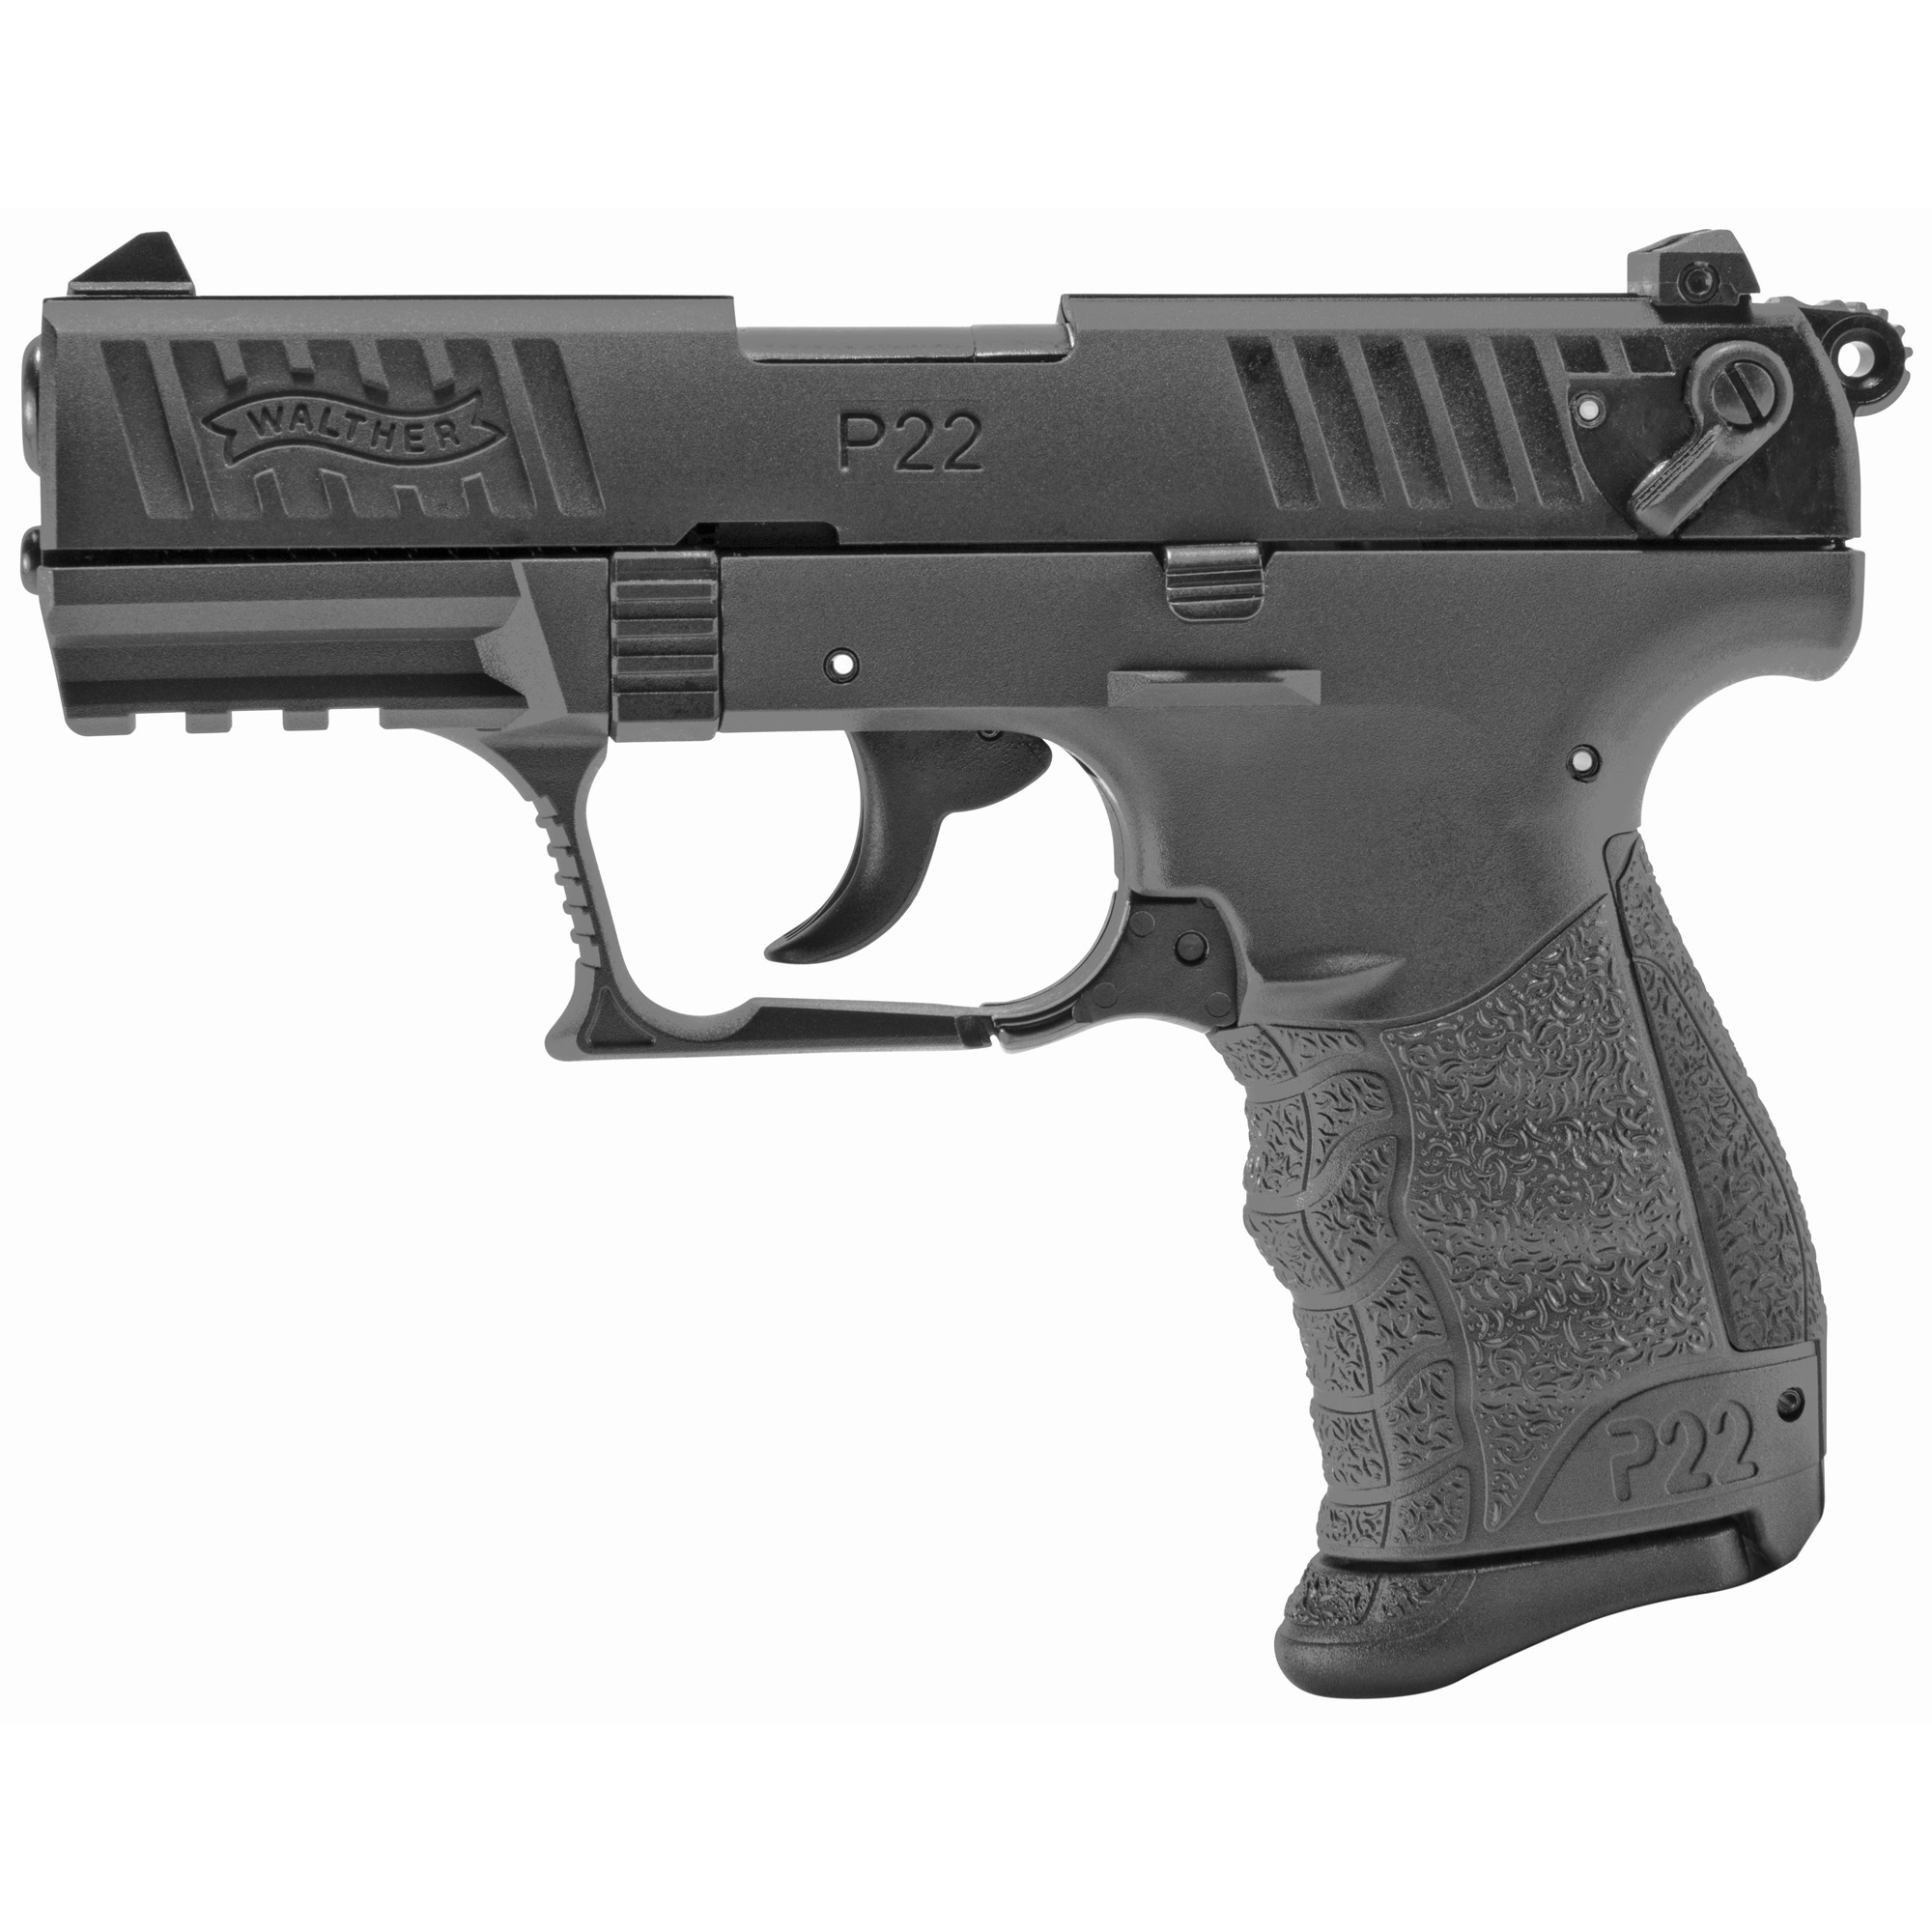 WALTHER P22Q 22LR 3.42 10RD TUNGSTEN GY